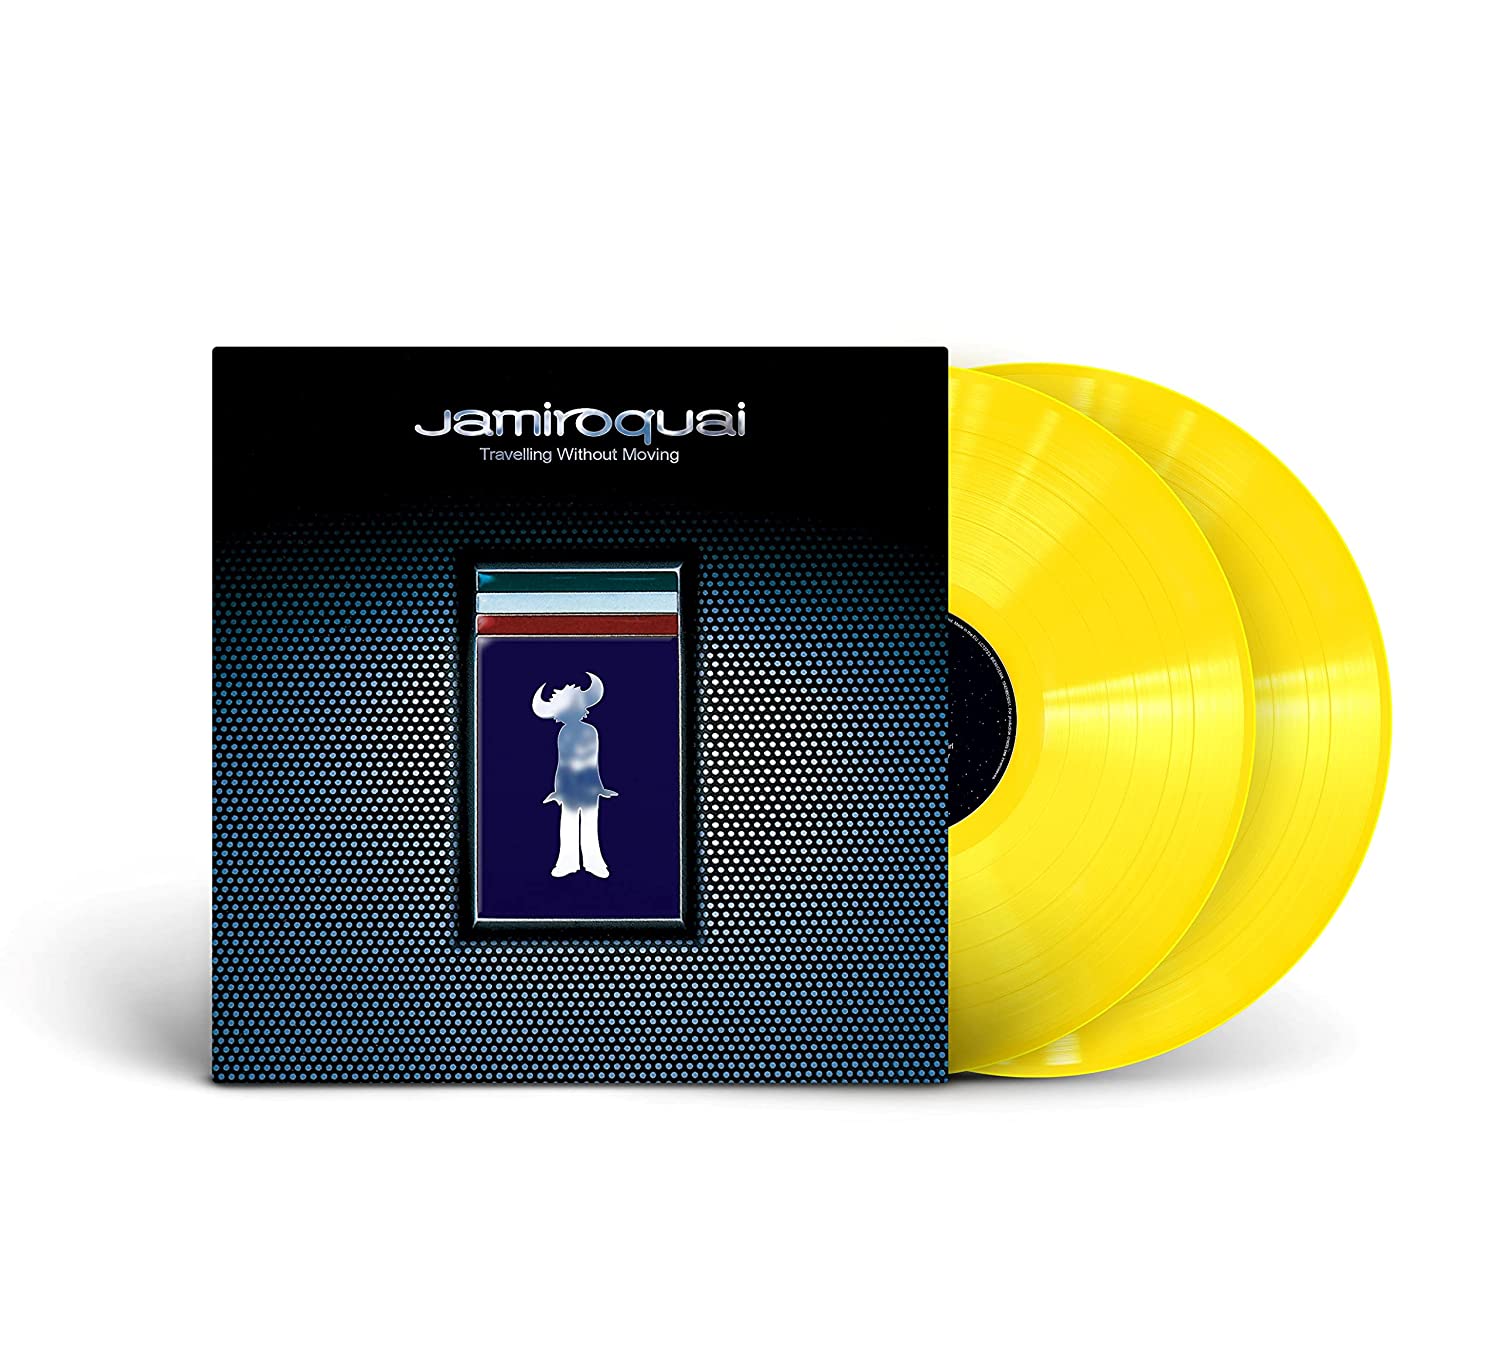 Jamiroquai (자미로콰이) - 3집 Travelling Without Moving [옐로우 컬러 2LP]